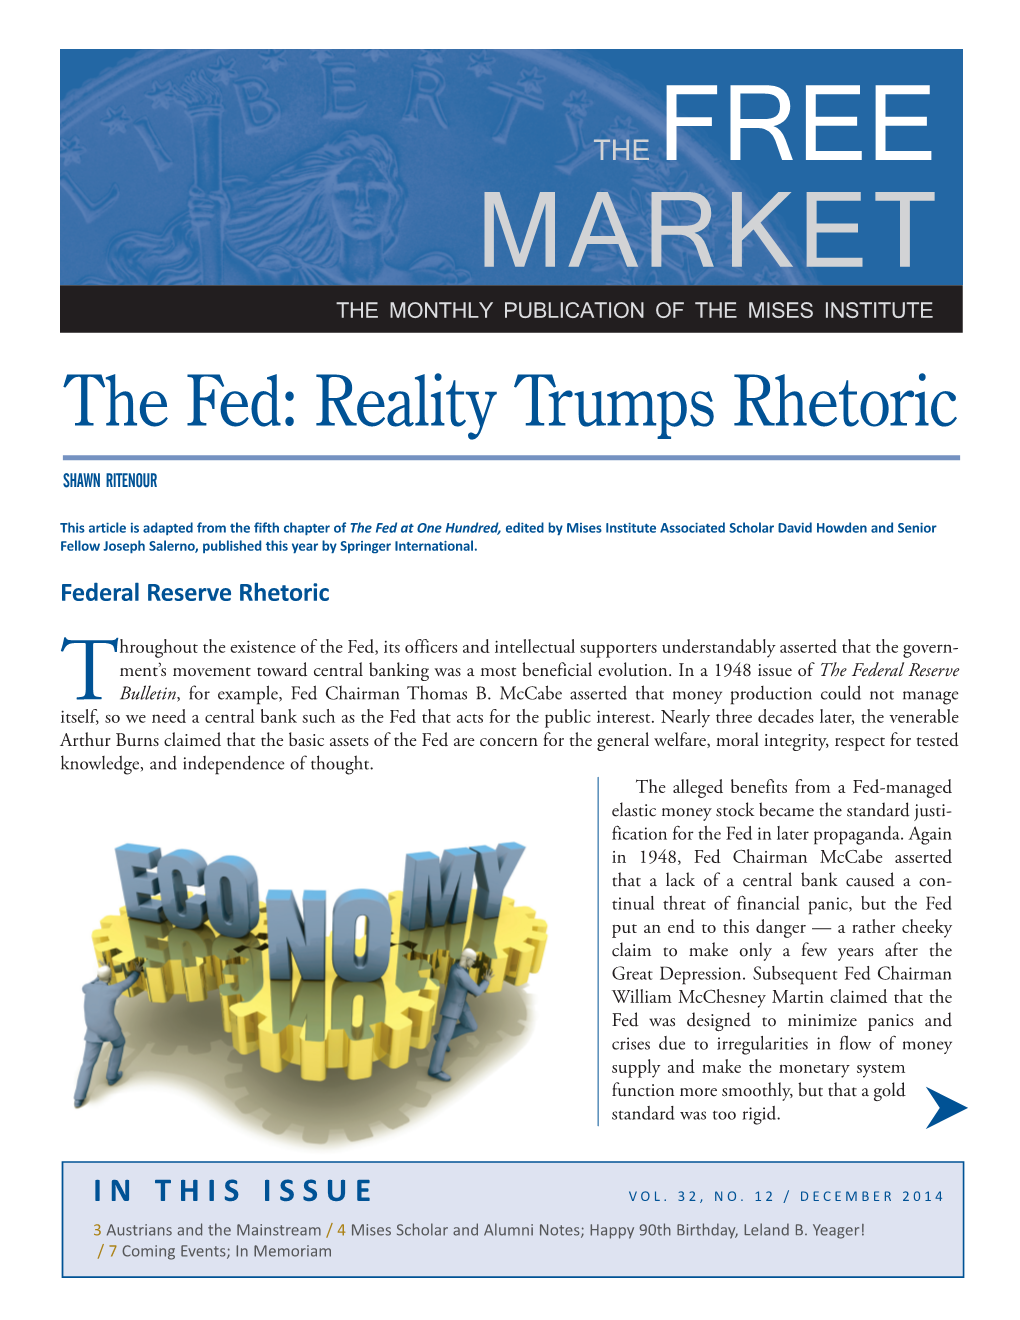 FREE MARKET the MONTHLY PUBLICATION of the MISES INSTITUTE the Fed: Reality Trumps Rhetoric